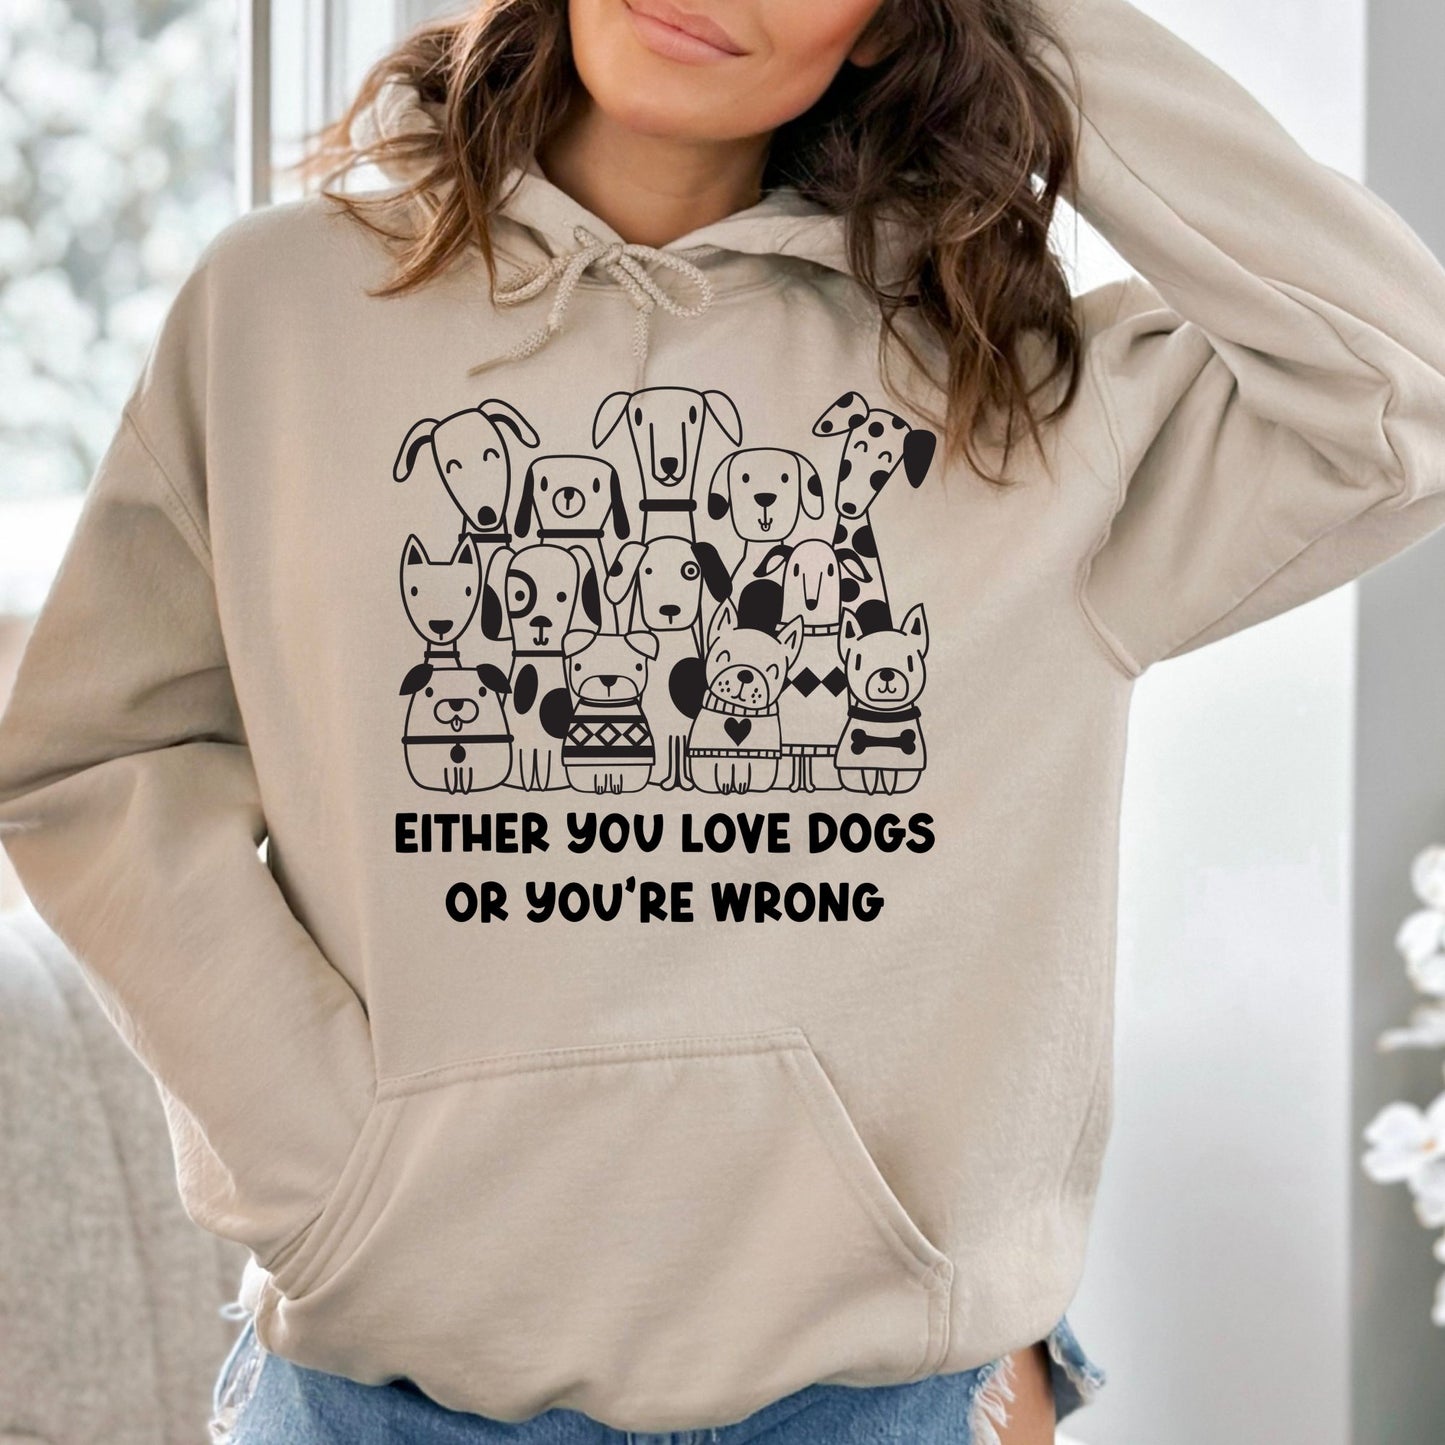 Either You Love Dogs or You're Wrong Hoodie Sweatshirt - PuppyJo Hoodie S / Sand